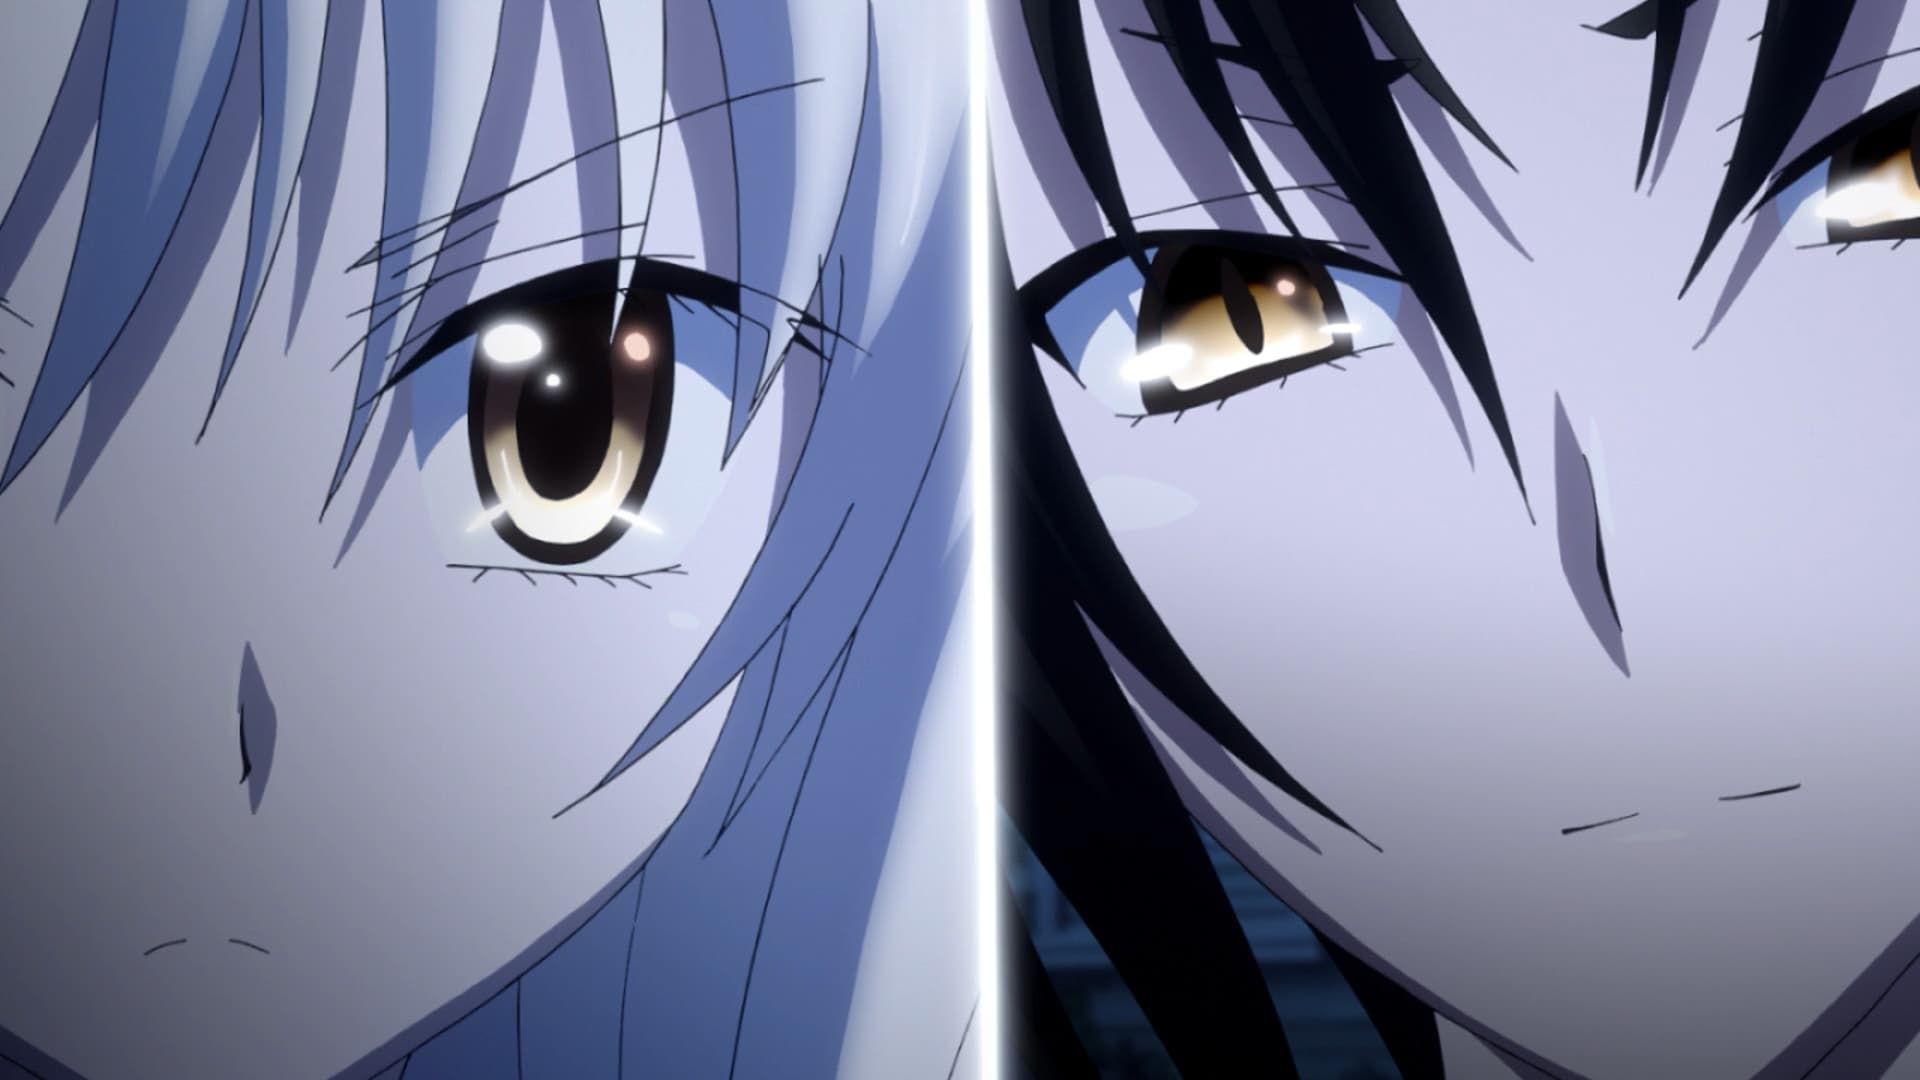 Watch High School DxD Season 2 Episode 6 - Go, Occult Research Club! Online  Now